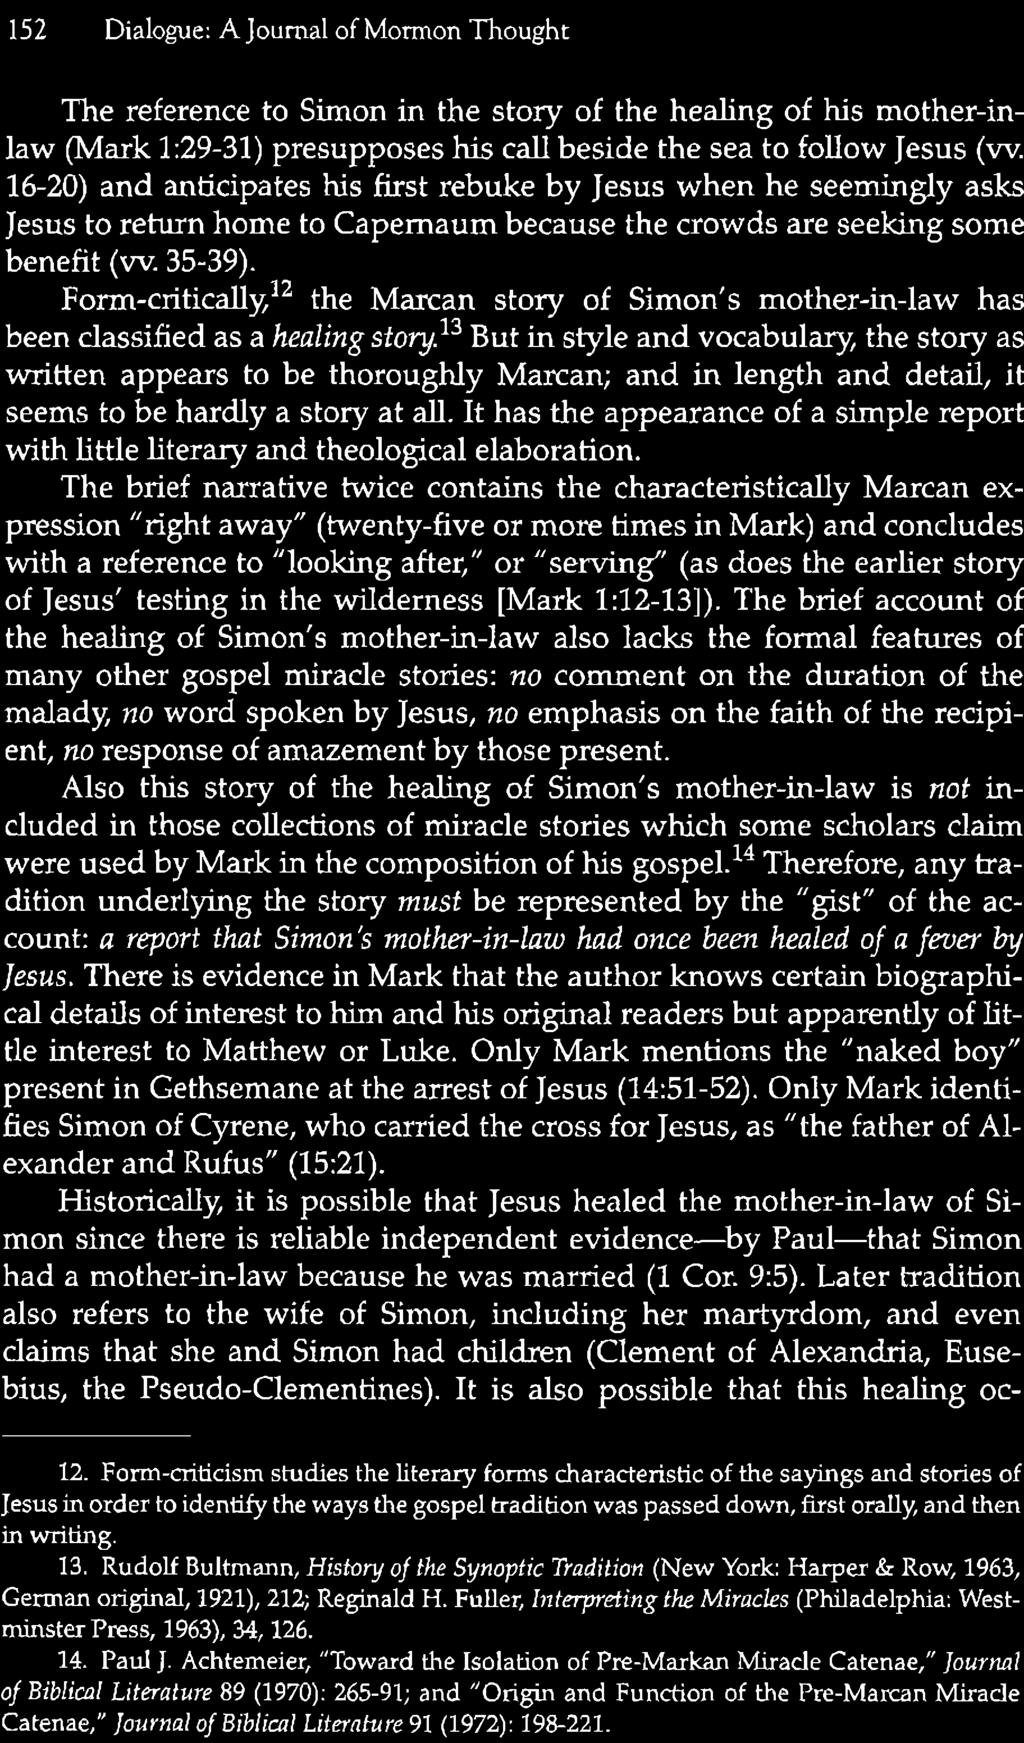 the earlier story of Jesus' testing in the wilderness [Mark 1:12-13]).